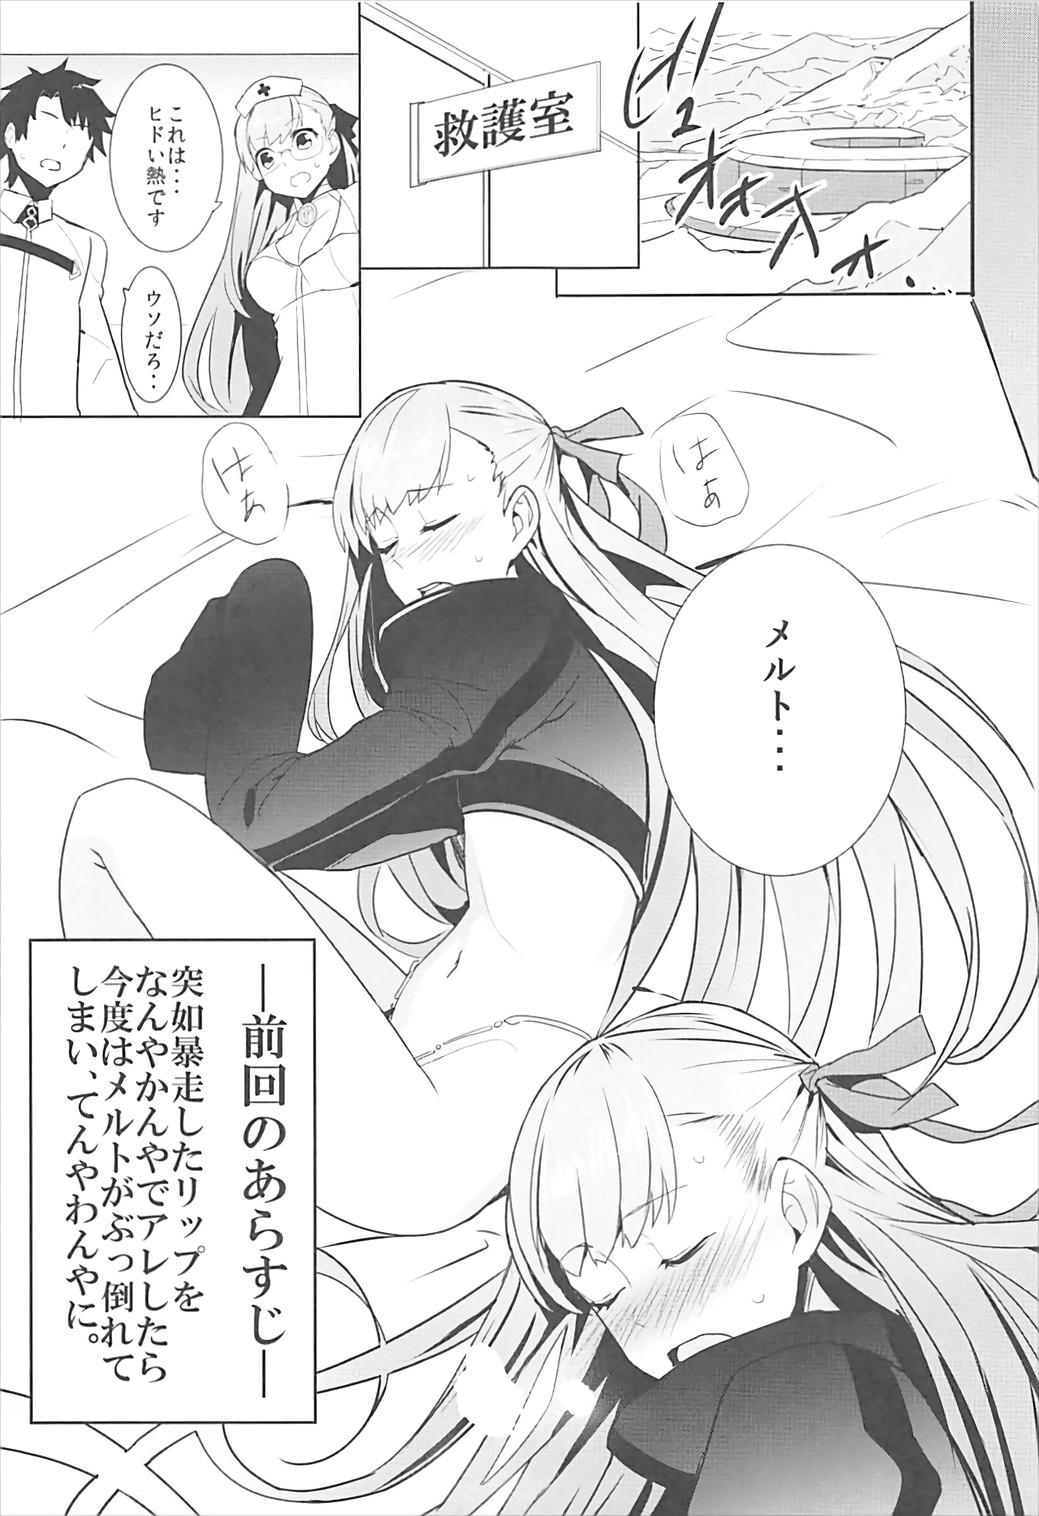 Indoor In the Passion Melty heart.2 - Fate grand order Boob - Page 4